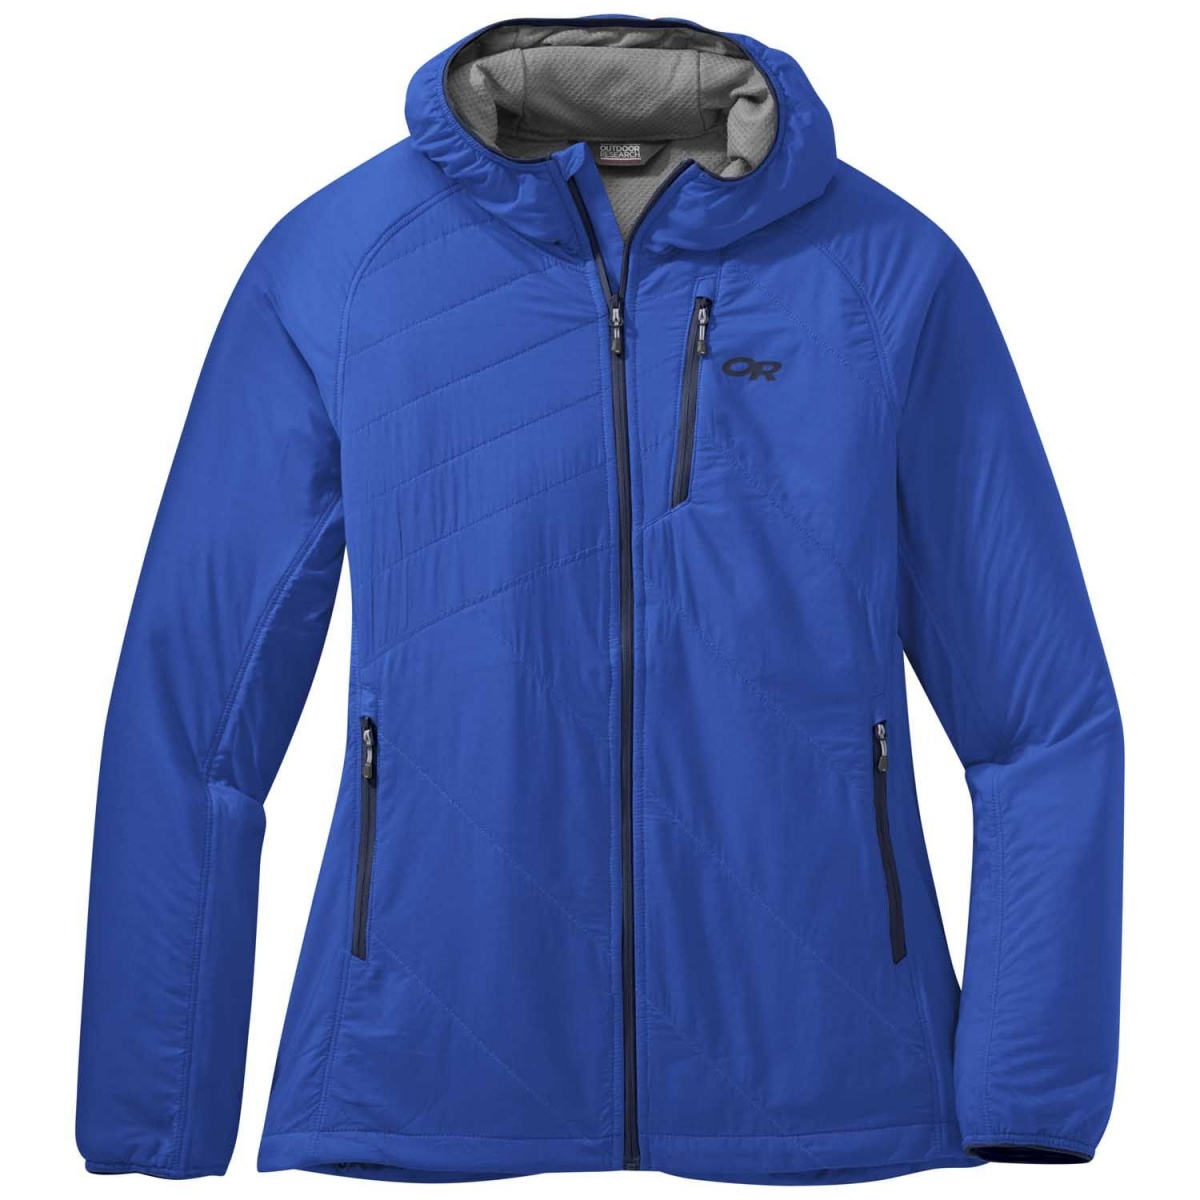 Outdoor Research Refuge Air Hoody - Women's Review